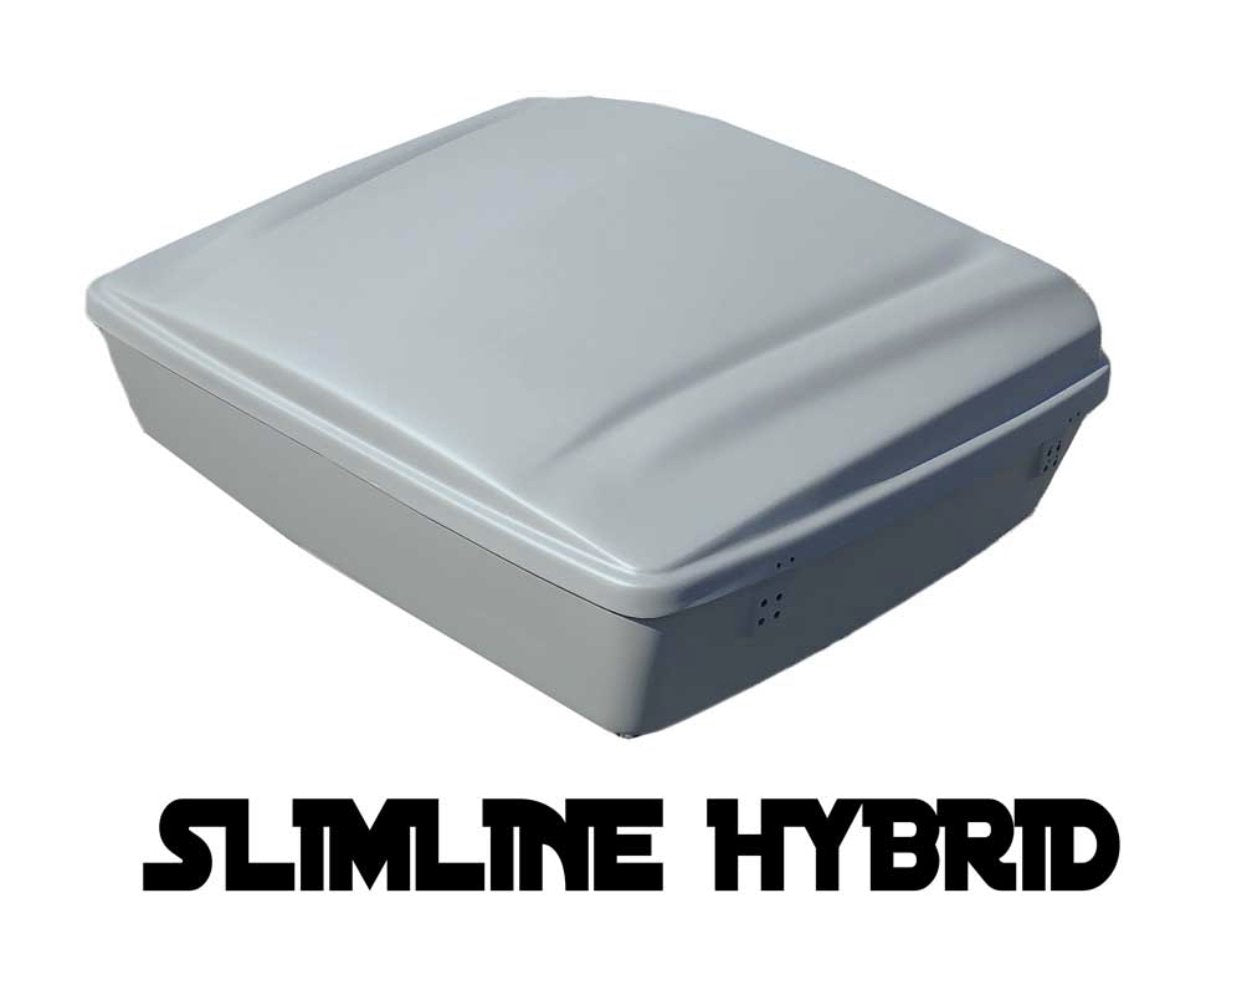 Motorcycle Trunk - The "Slimline HYBRID" Razor Tour Pack is Universal Fitment (Height 10")